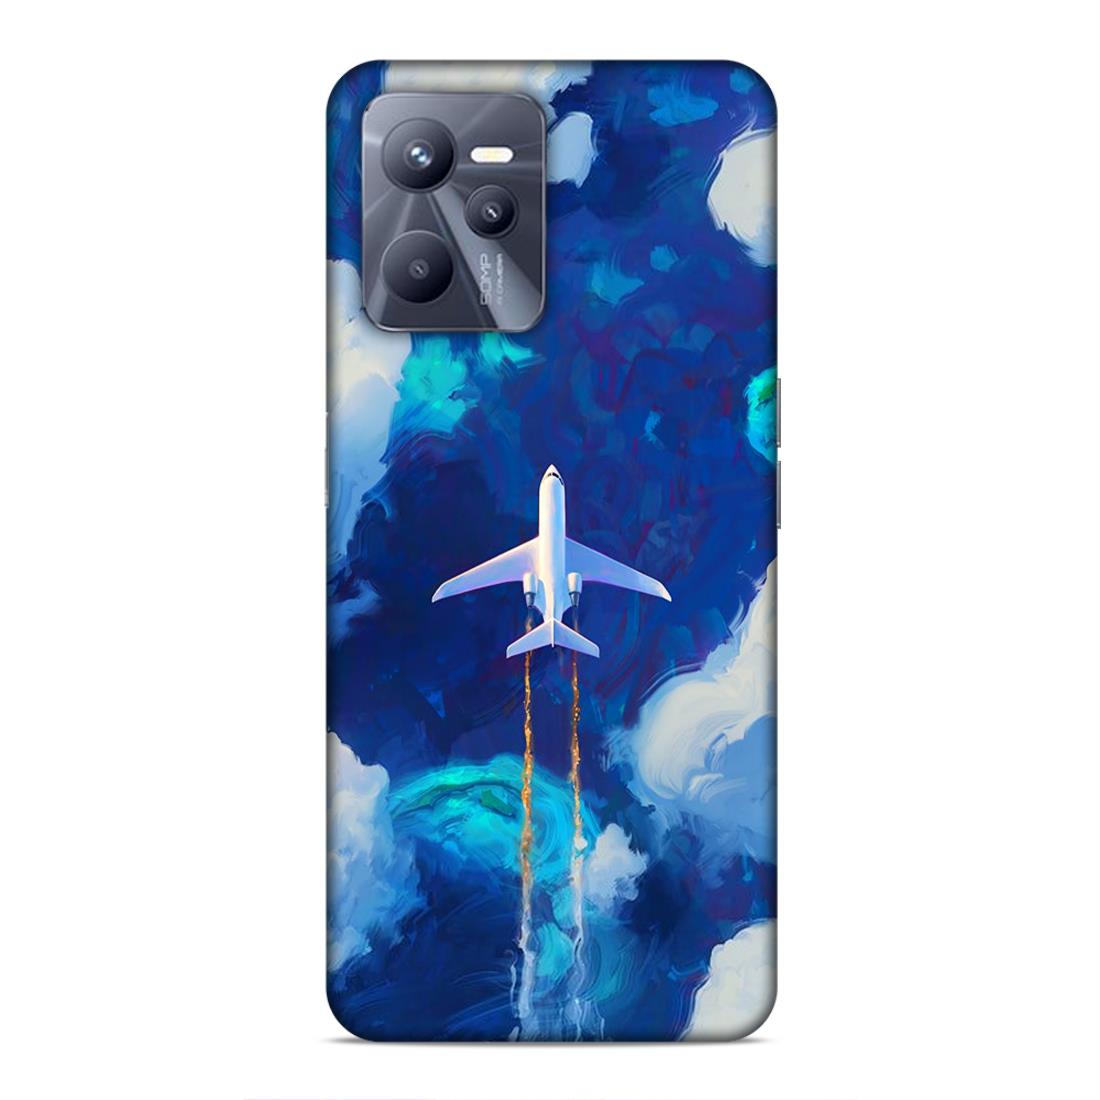 Aeroplane In The Sky Hard Back Case For Realme C35